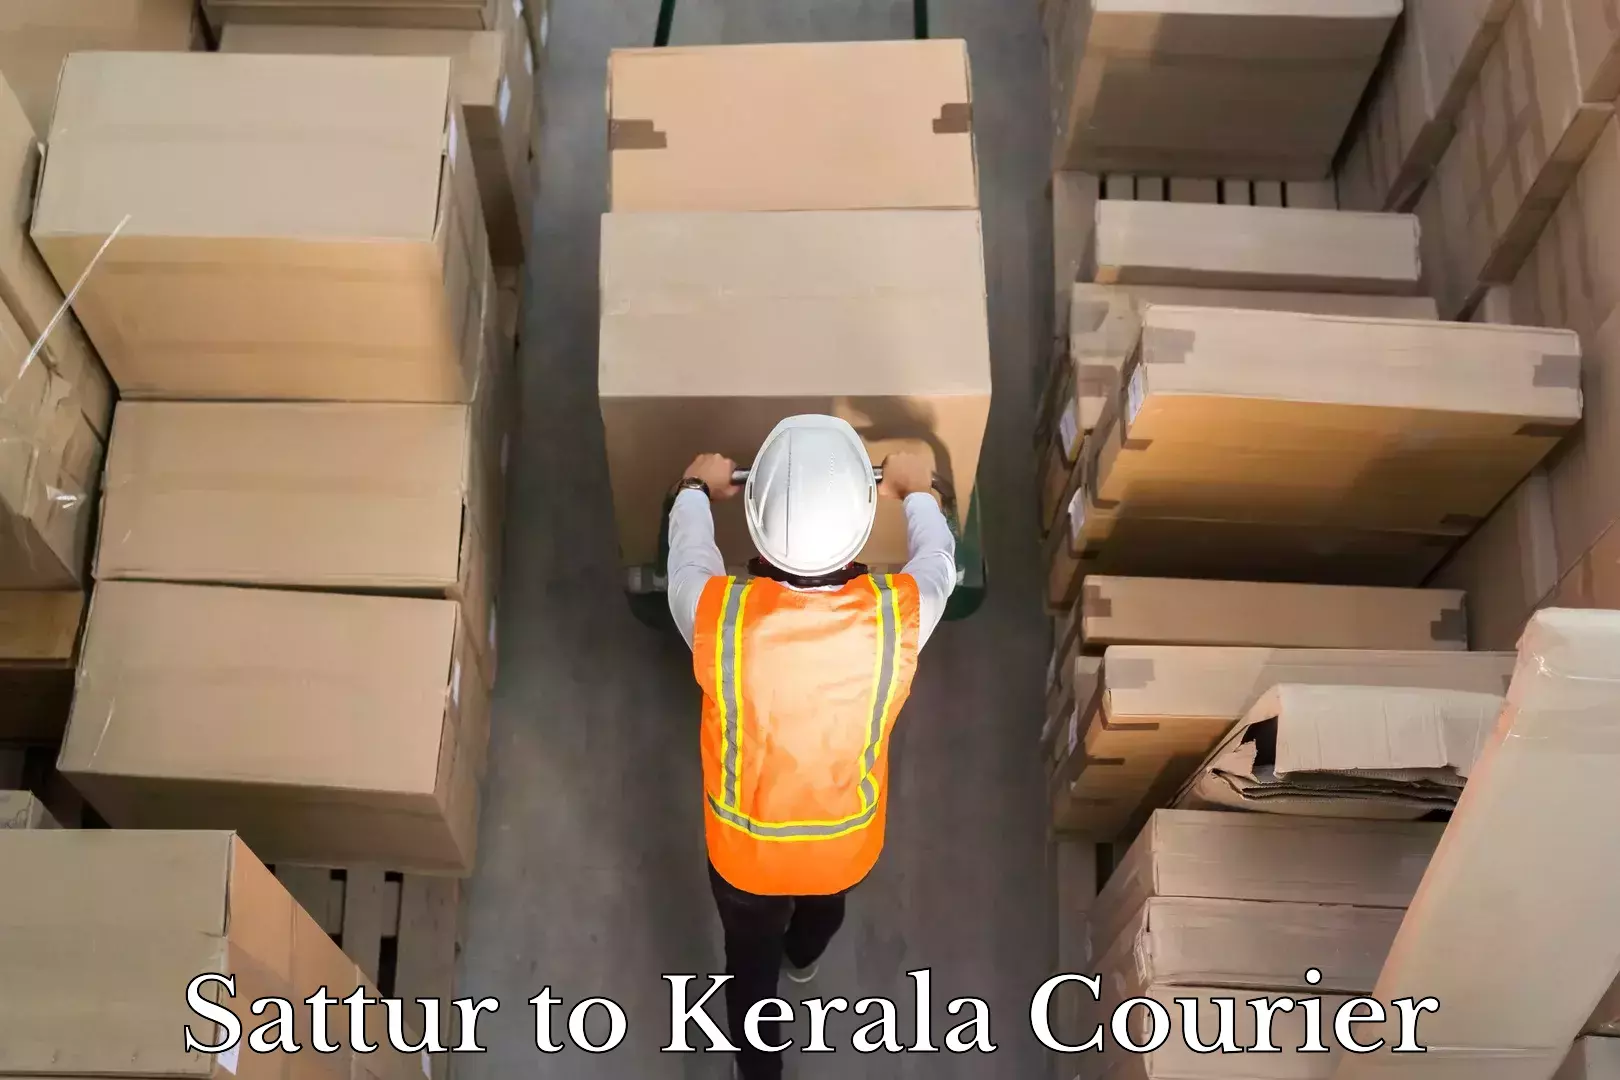 Cash on delivery service Sattur to Kerala